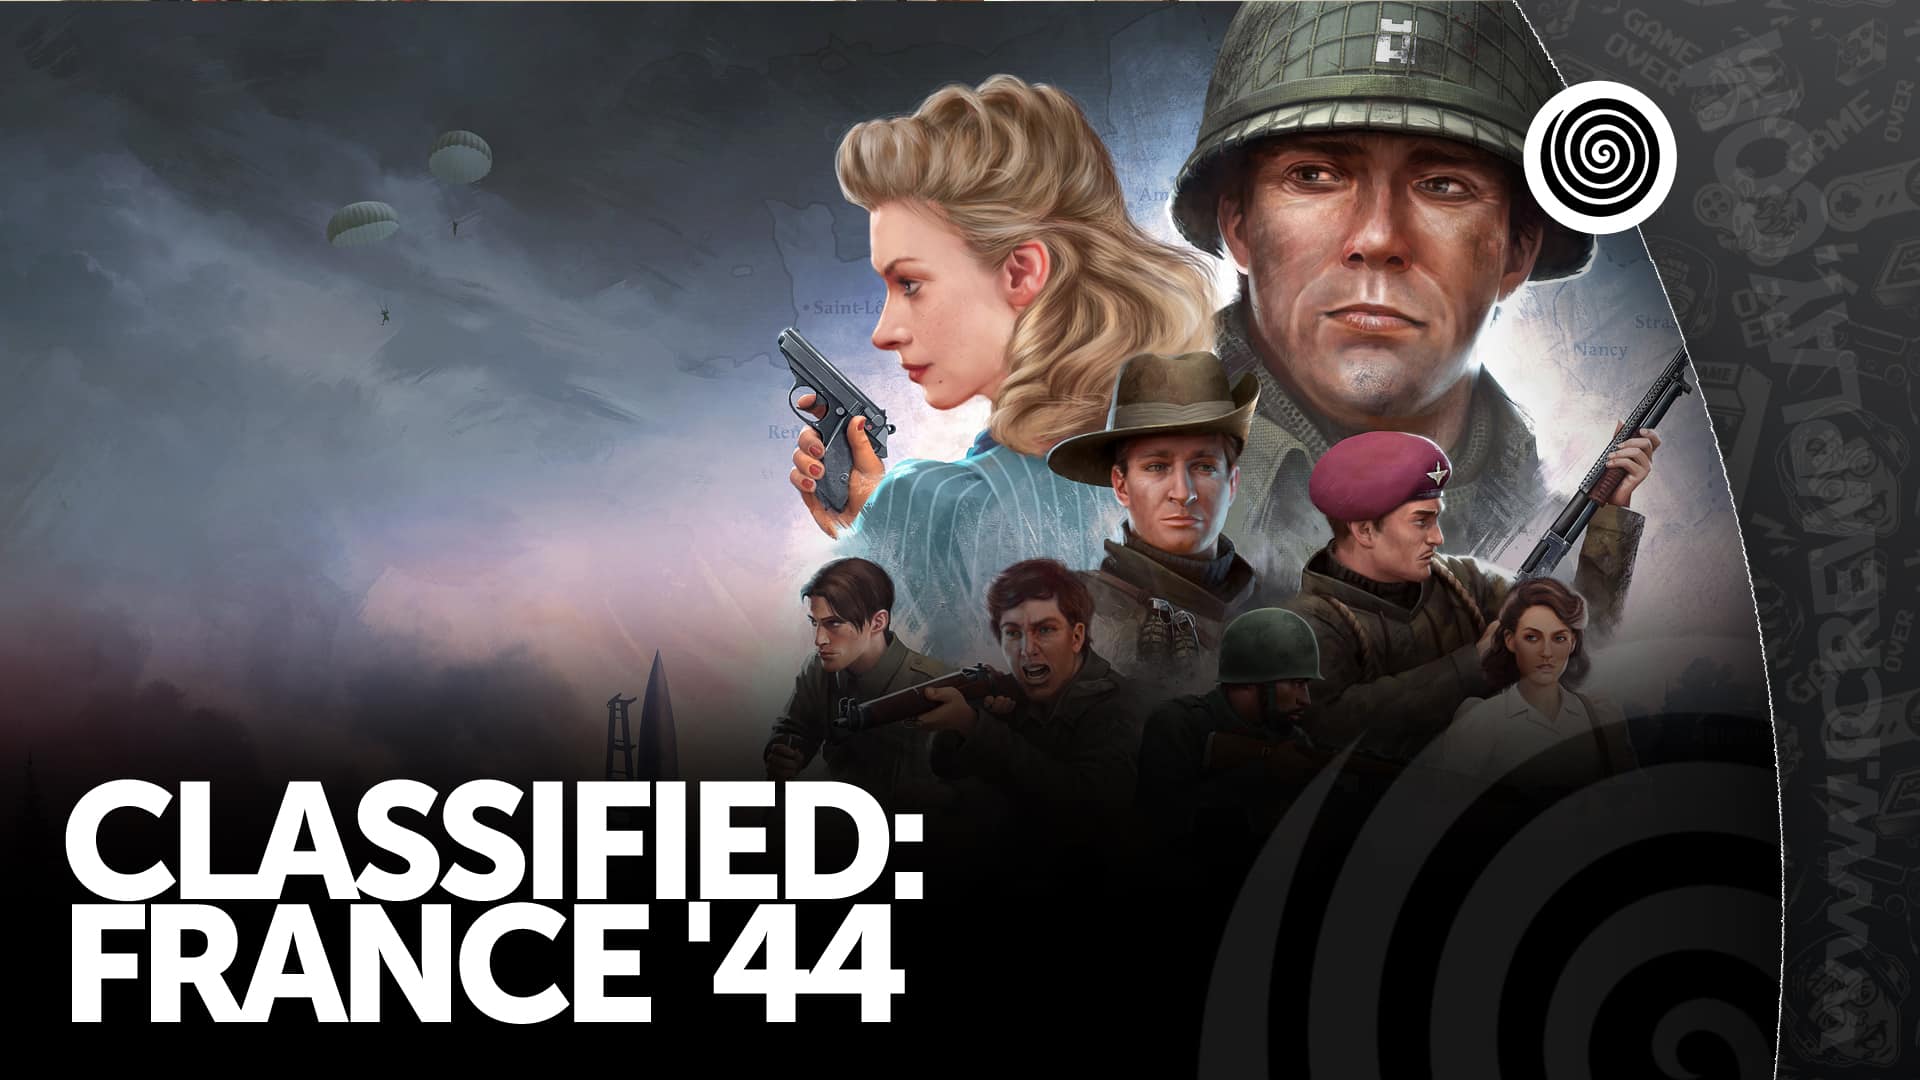 Classified France 44 recensione